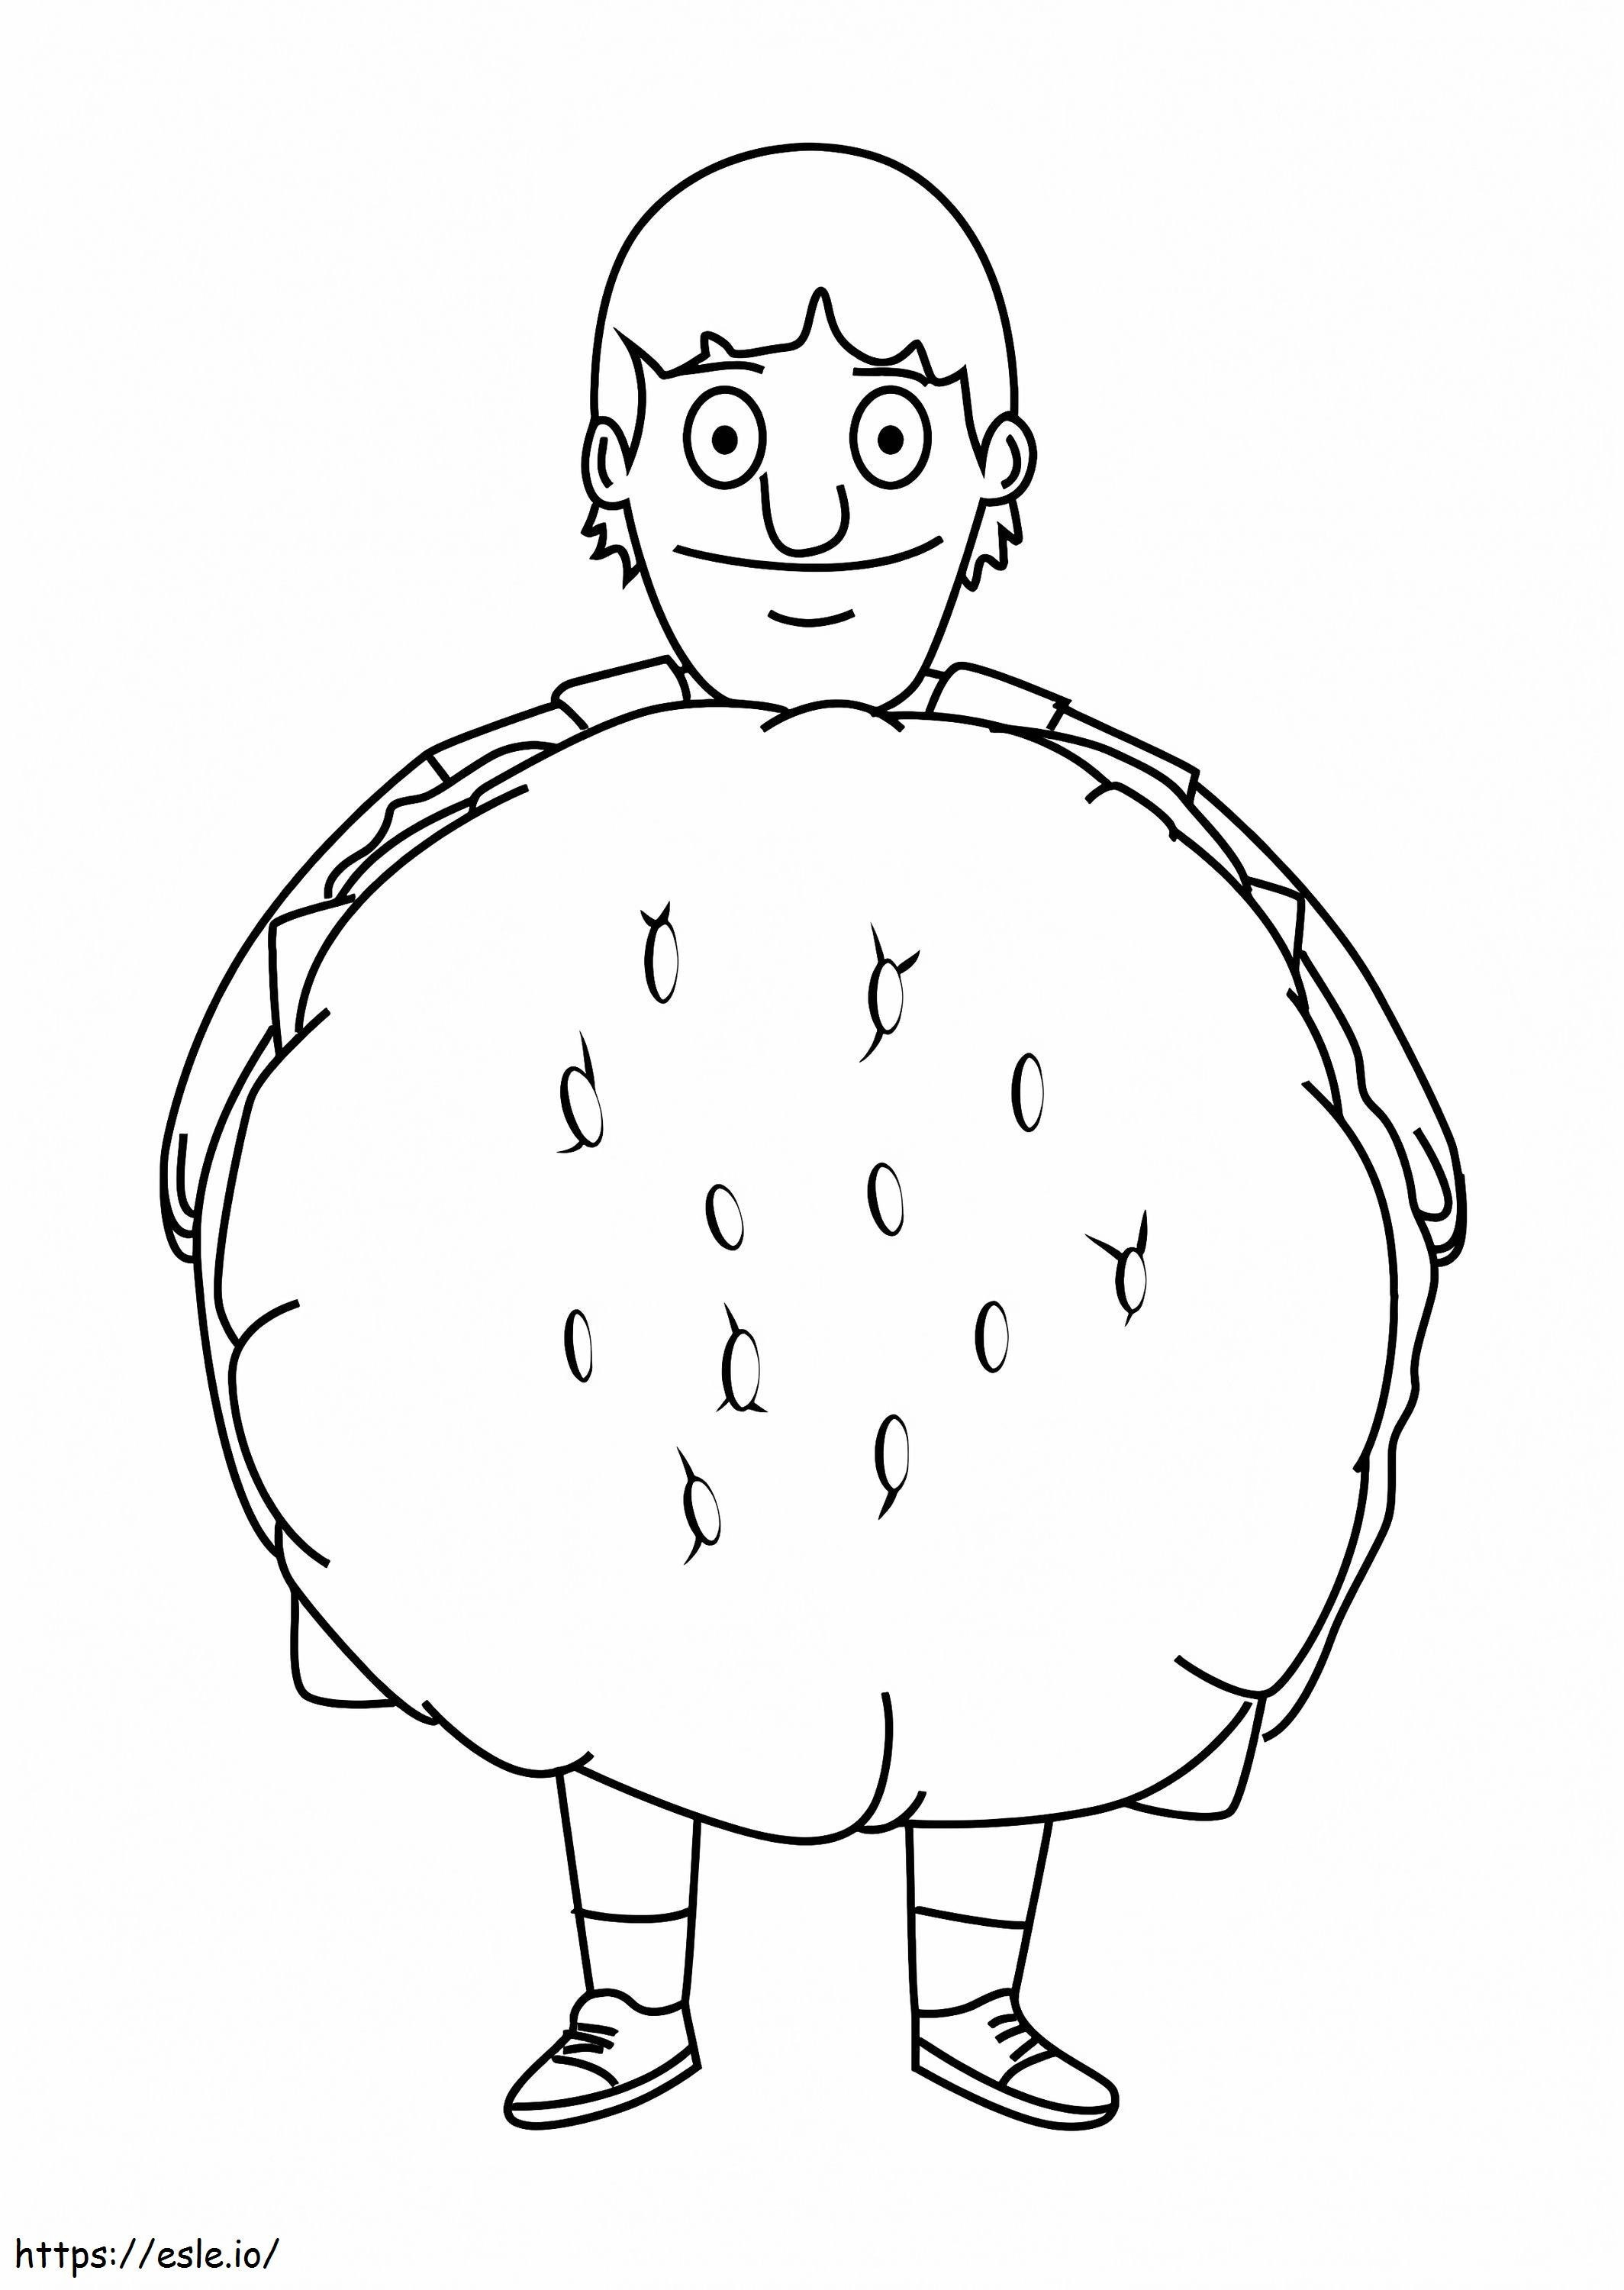 1590484463 Sdgfsegegewg coloring page